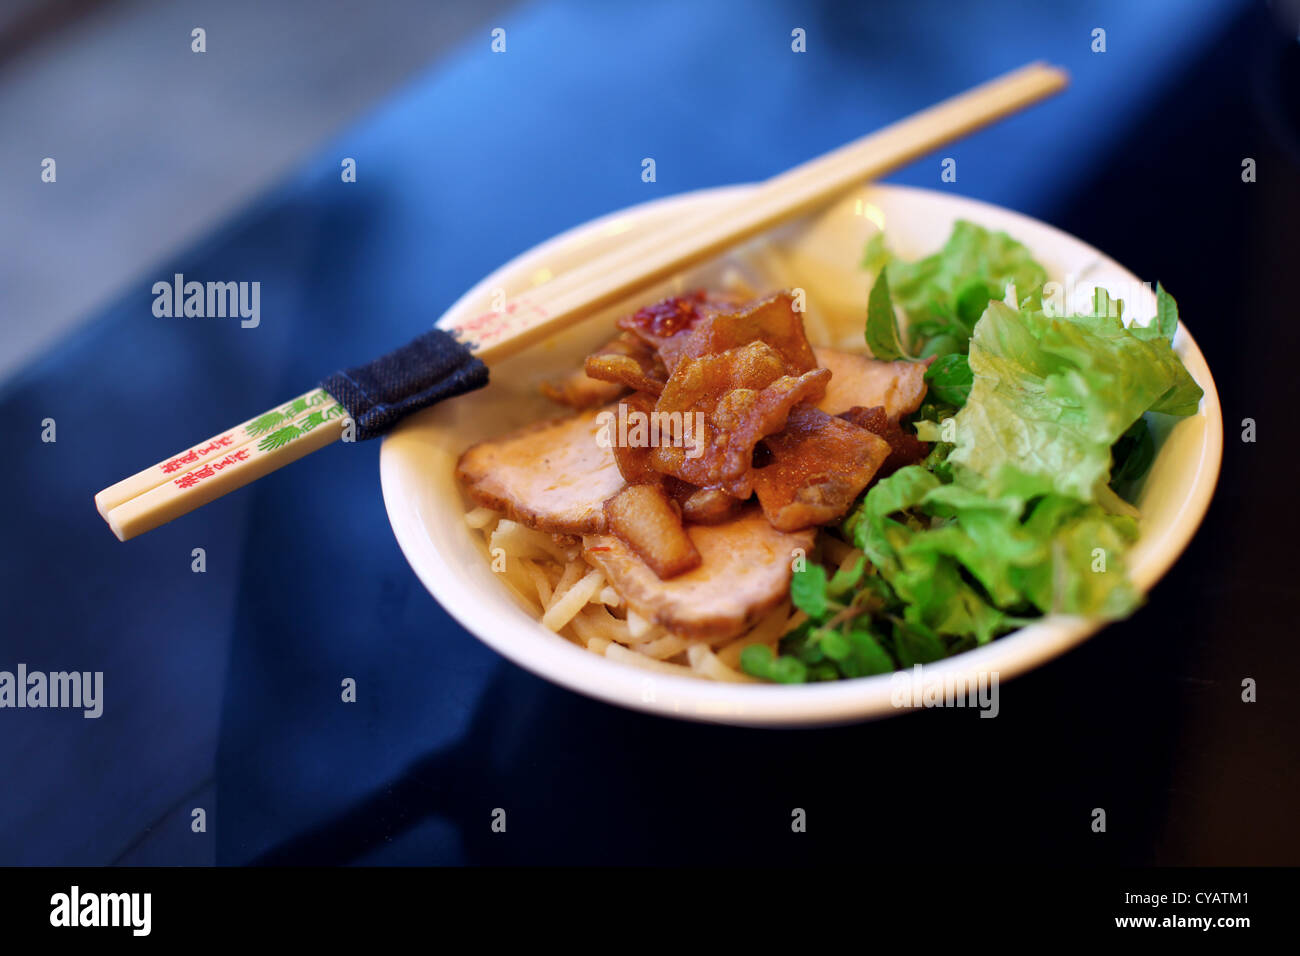 Pork fried and sliced on salad and rice noodles Stock Photo